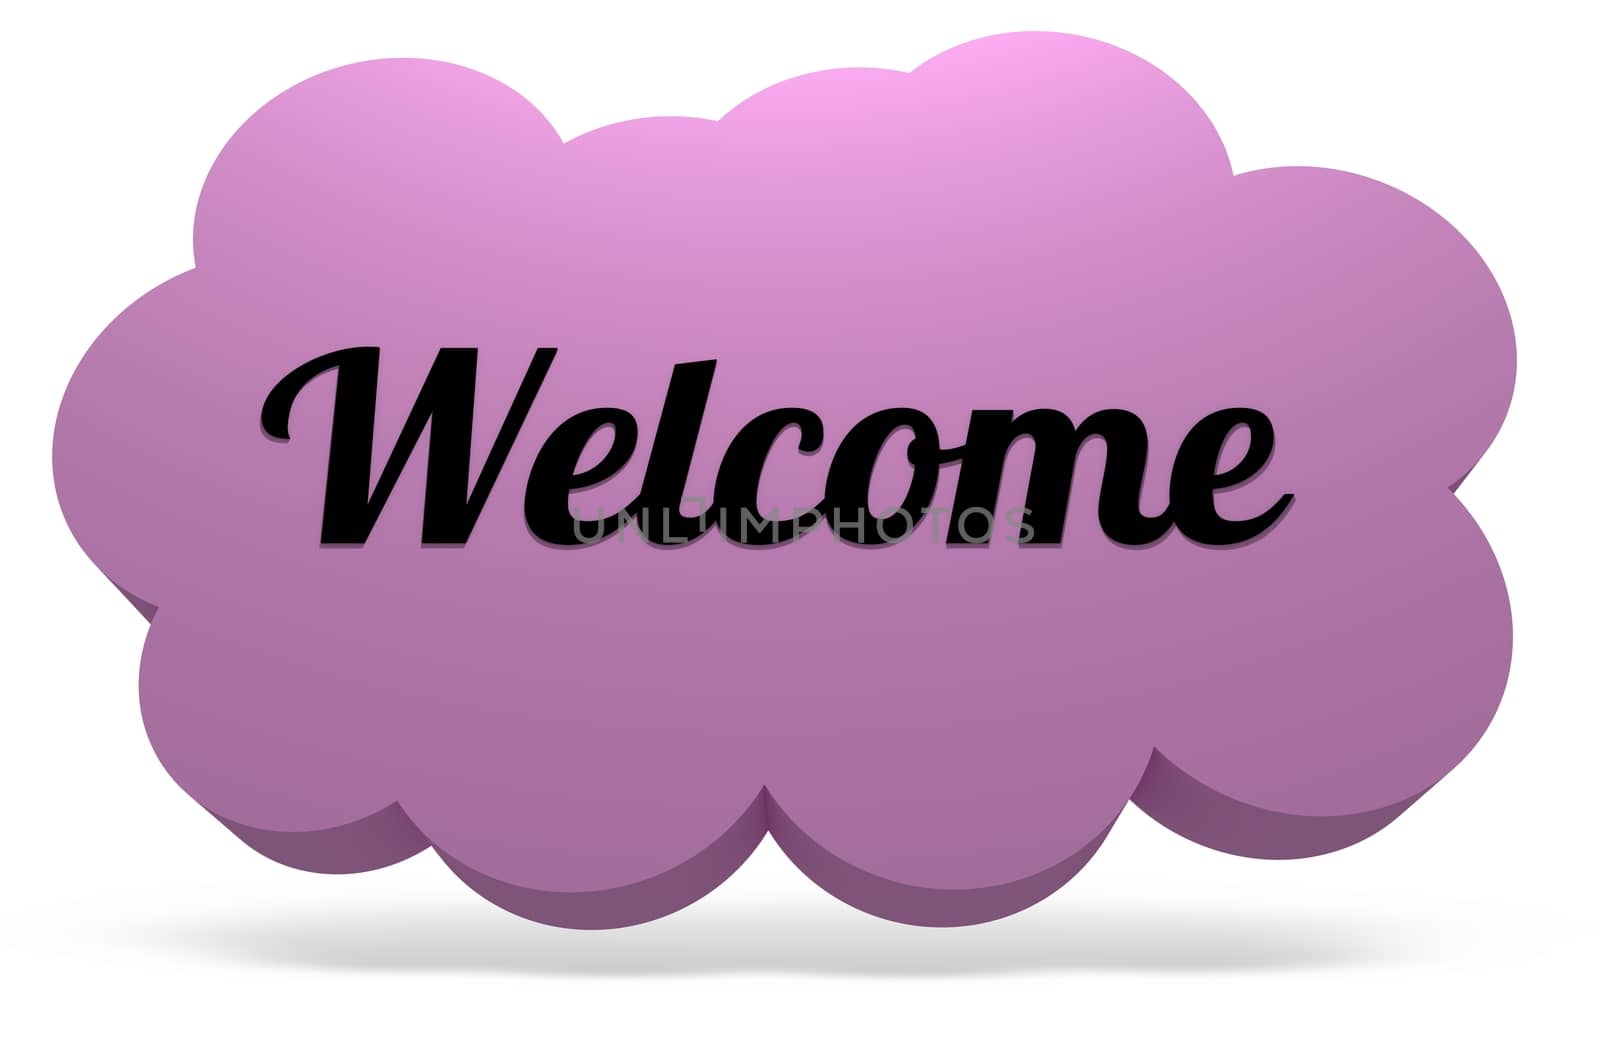 Illustrated cloud with drop shadow and the word Welcome